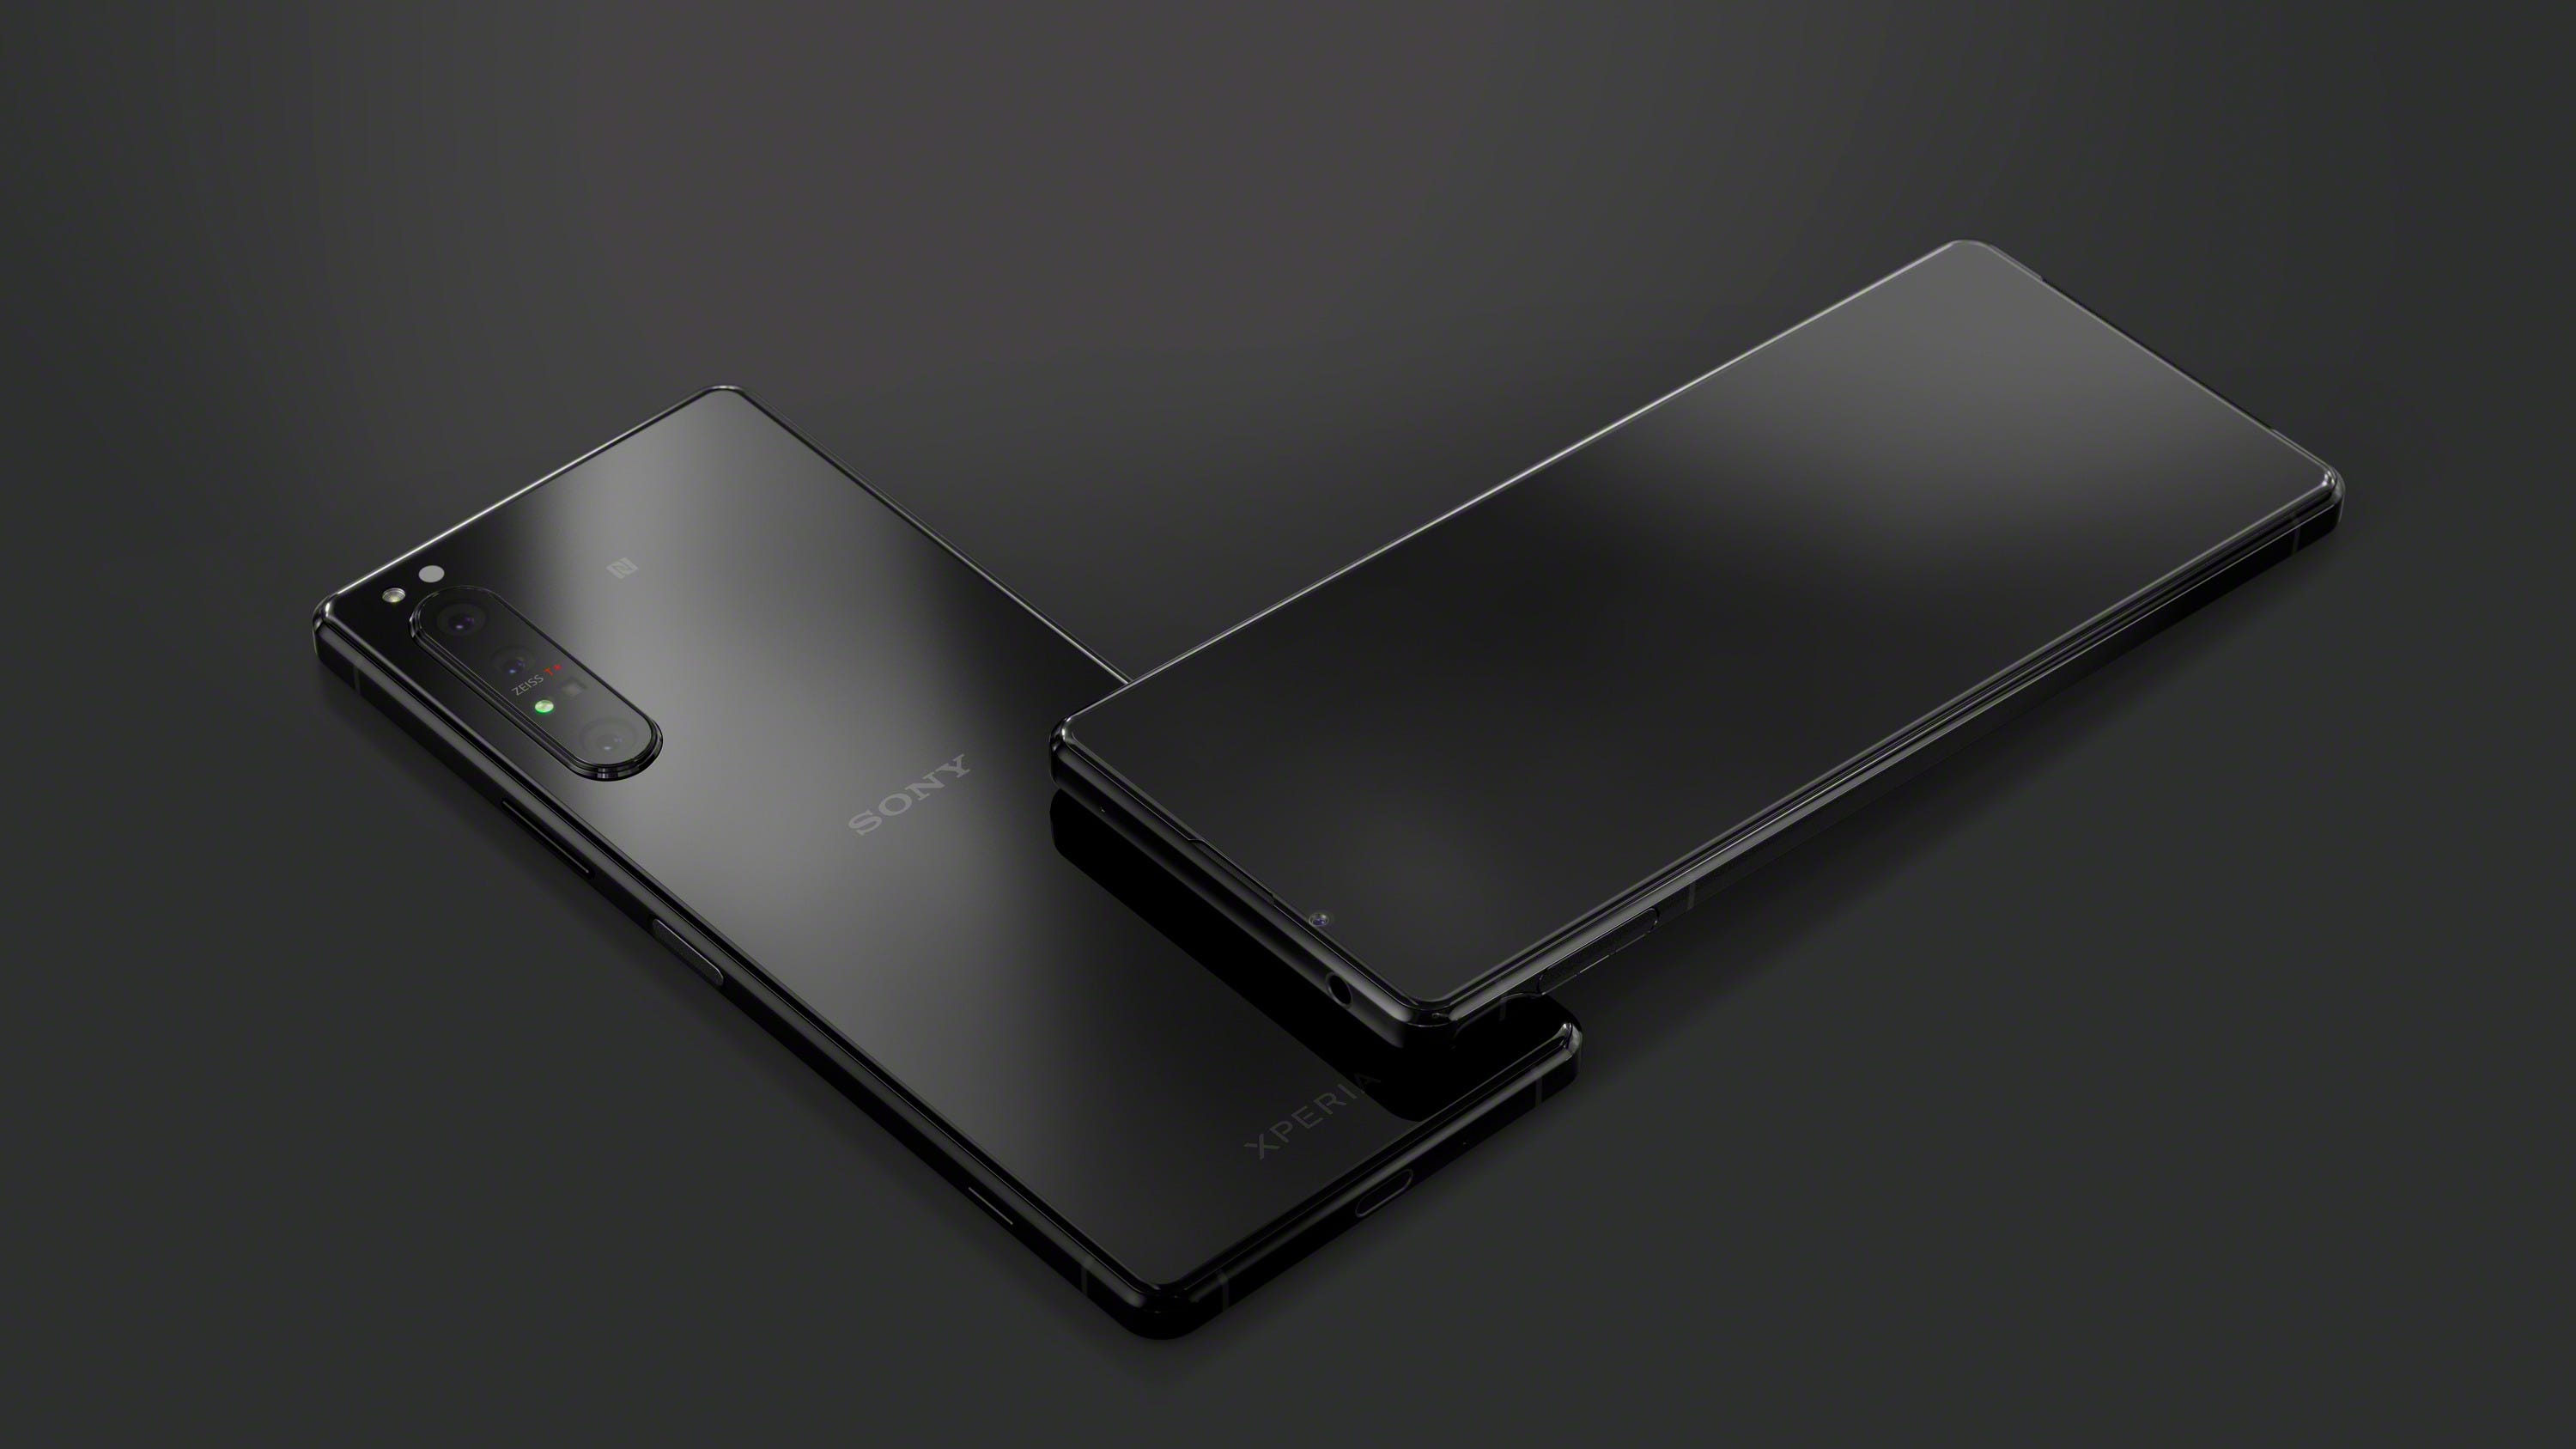 Xperia 1 Ii Release In Japan Delayed Sony Reconsidered